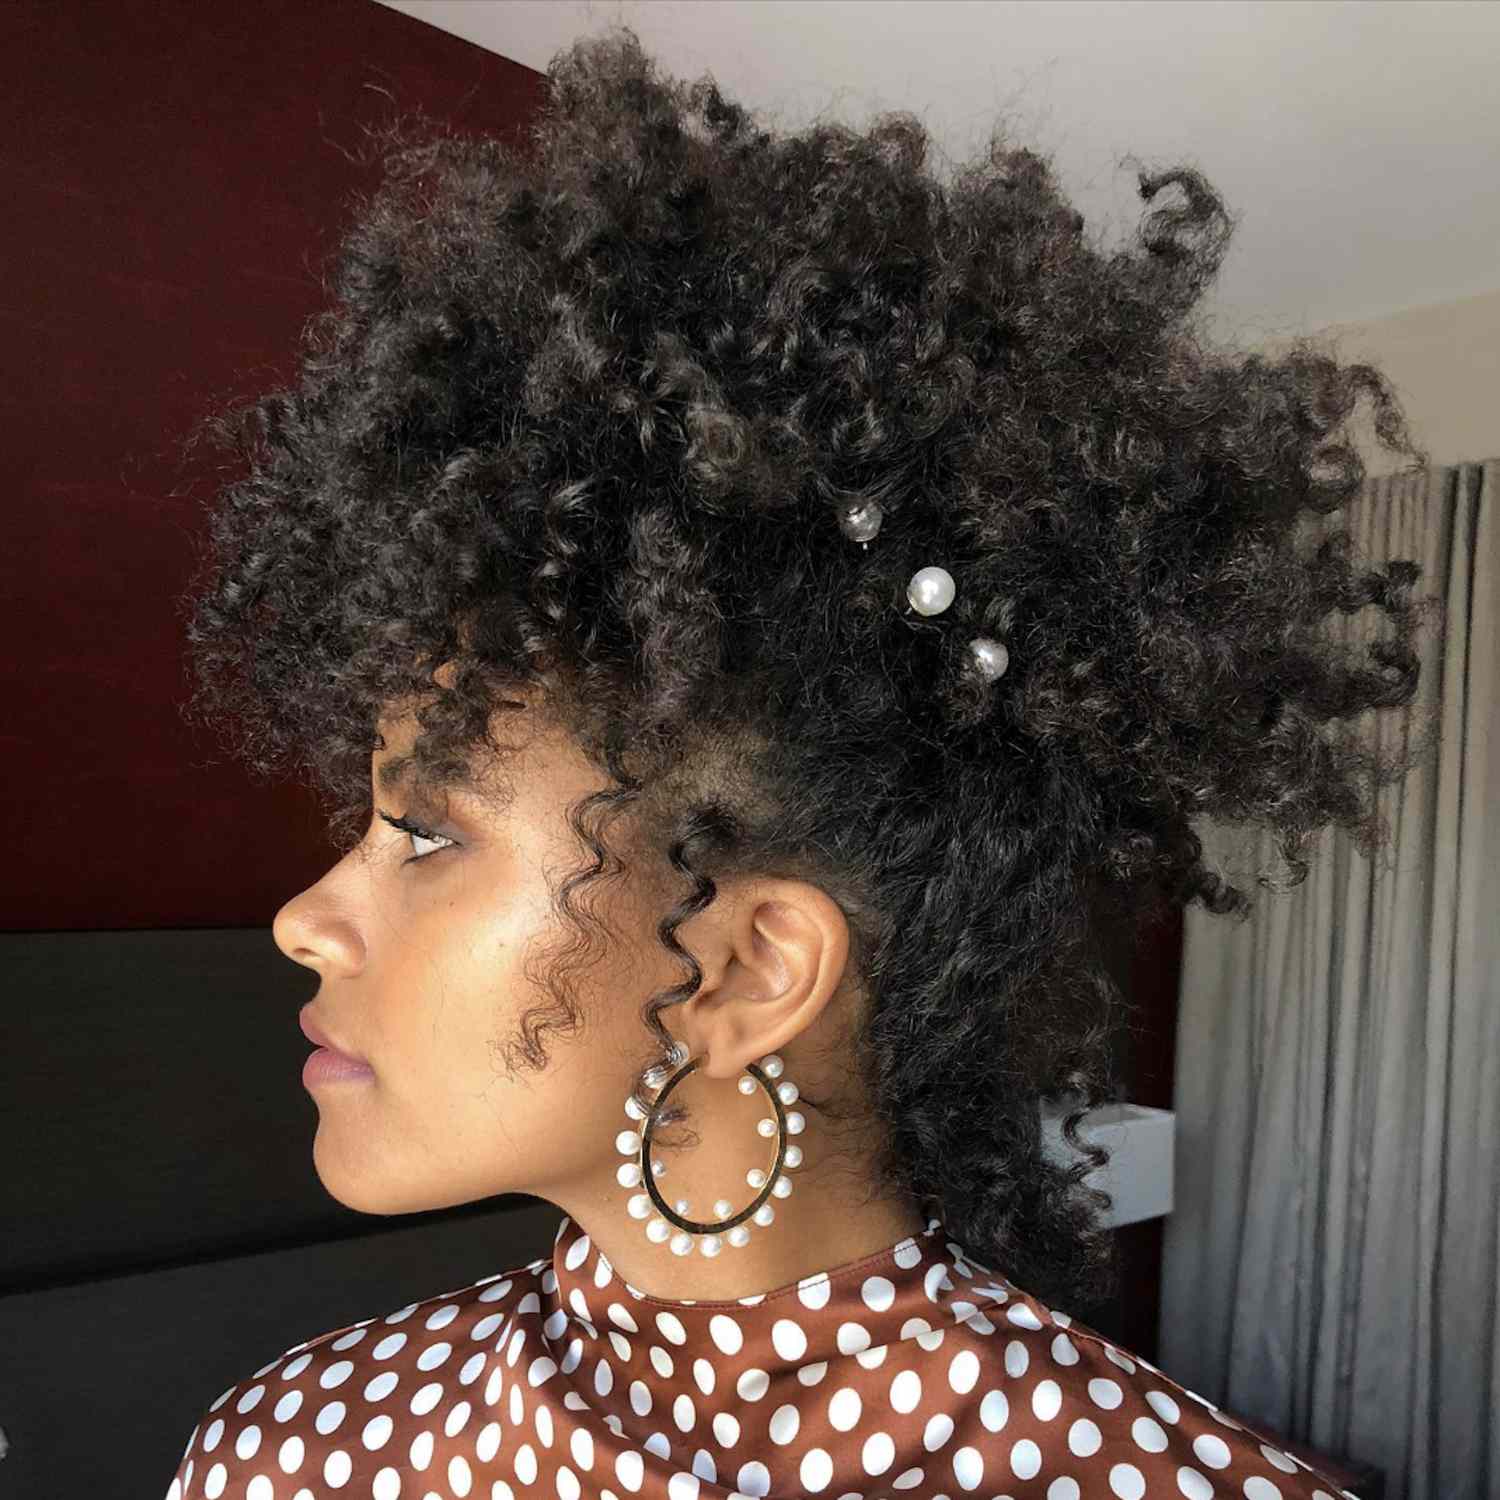 Zazie Beetz wears a curly updo hairstyle with pearl pins